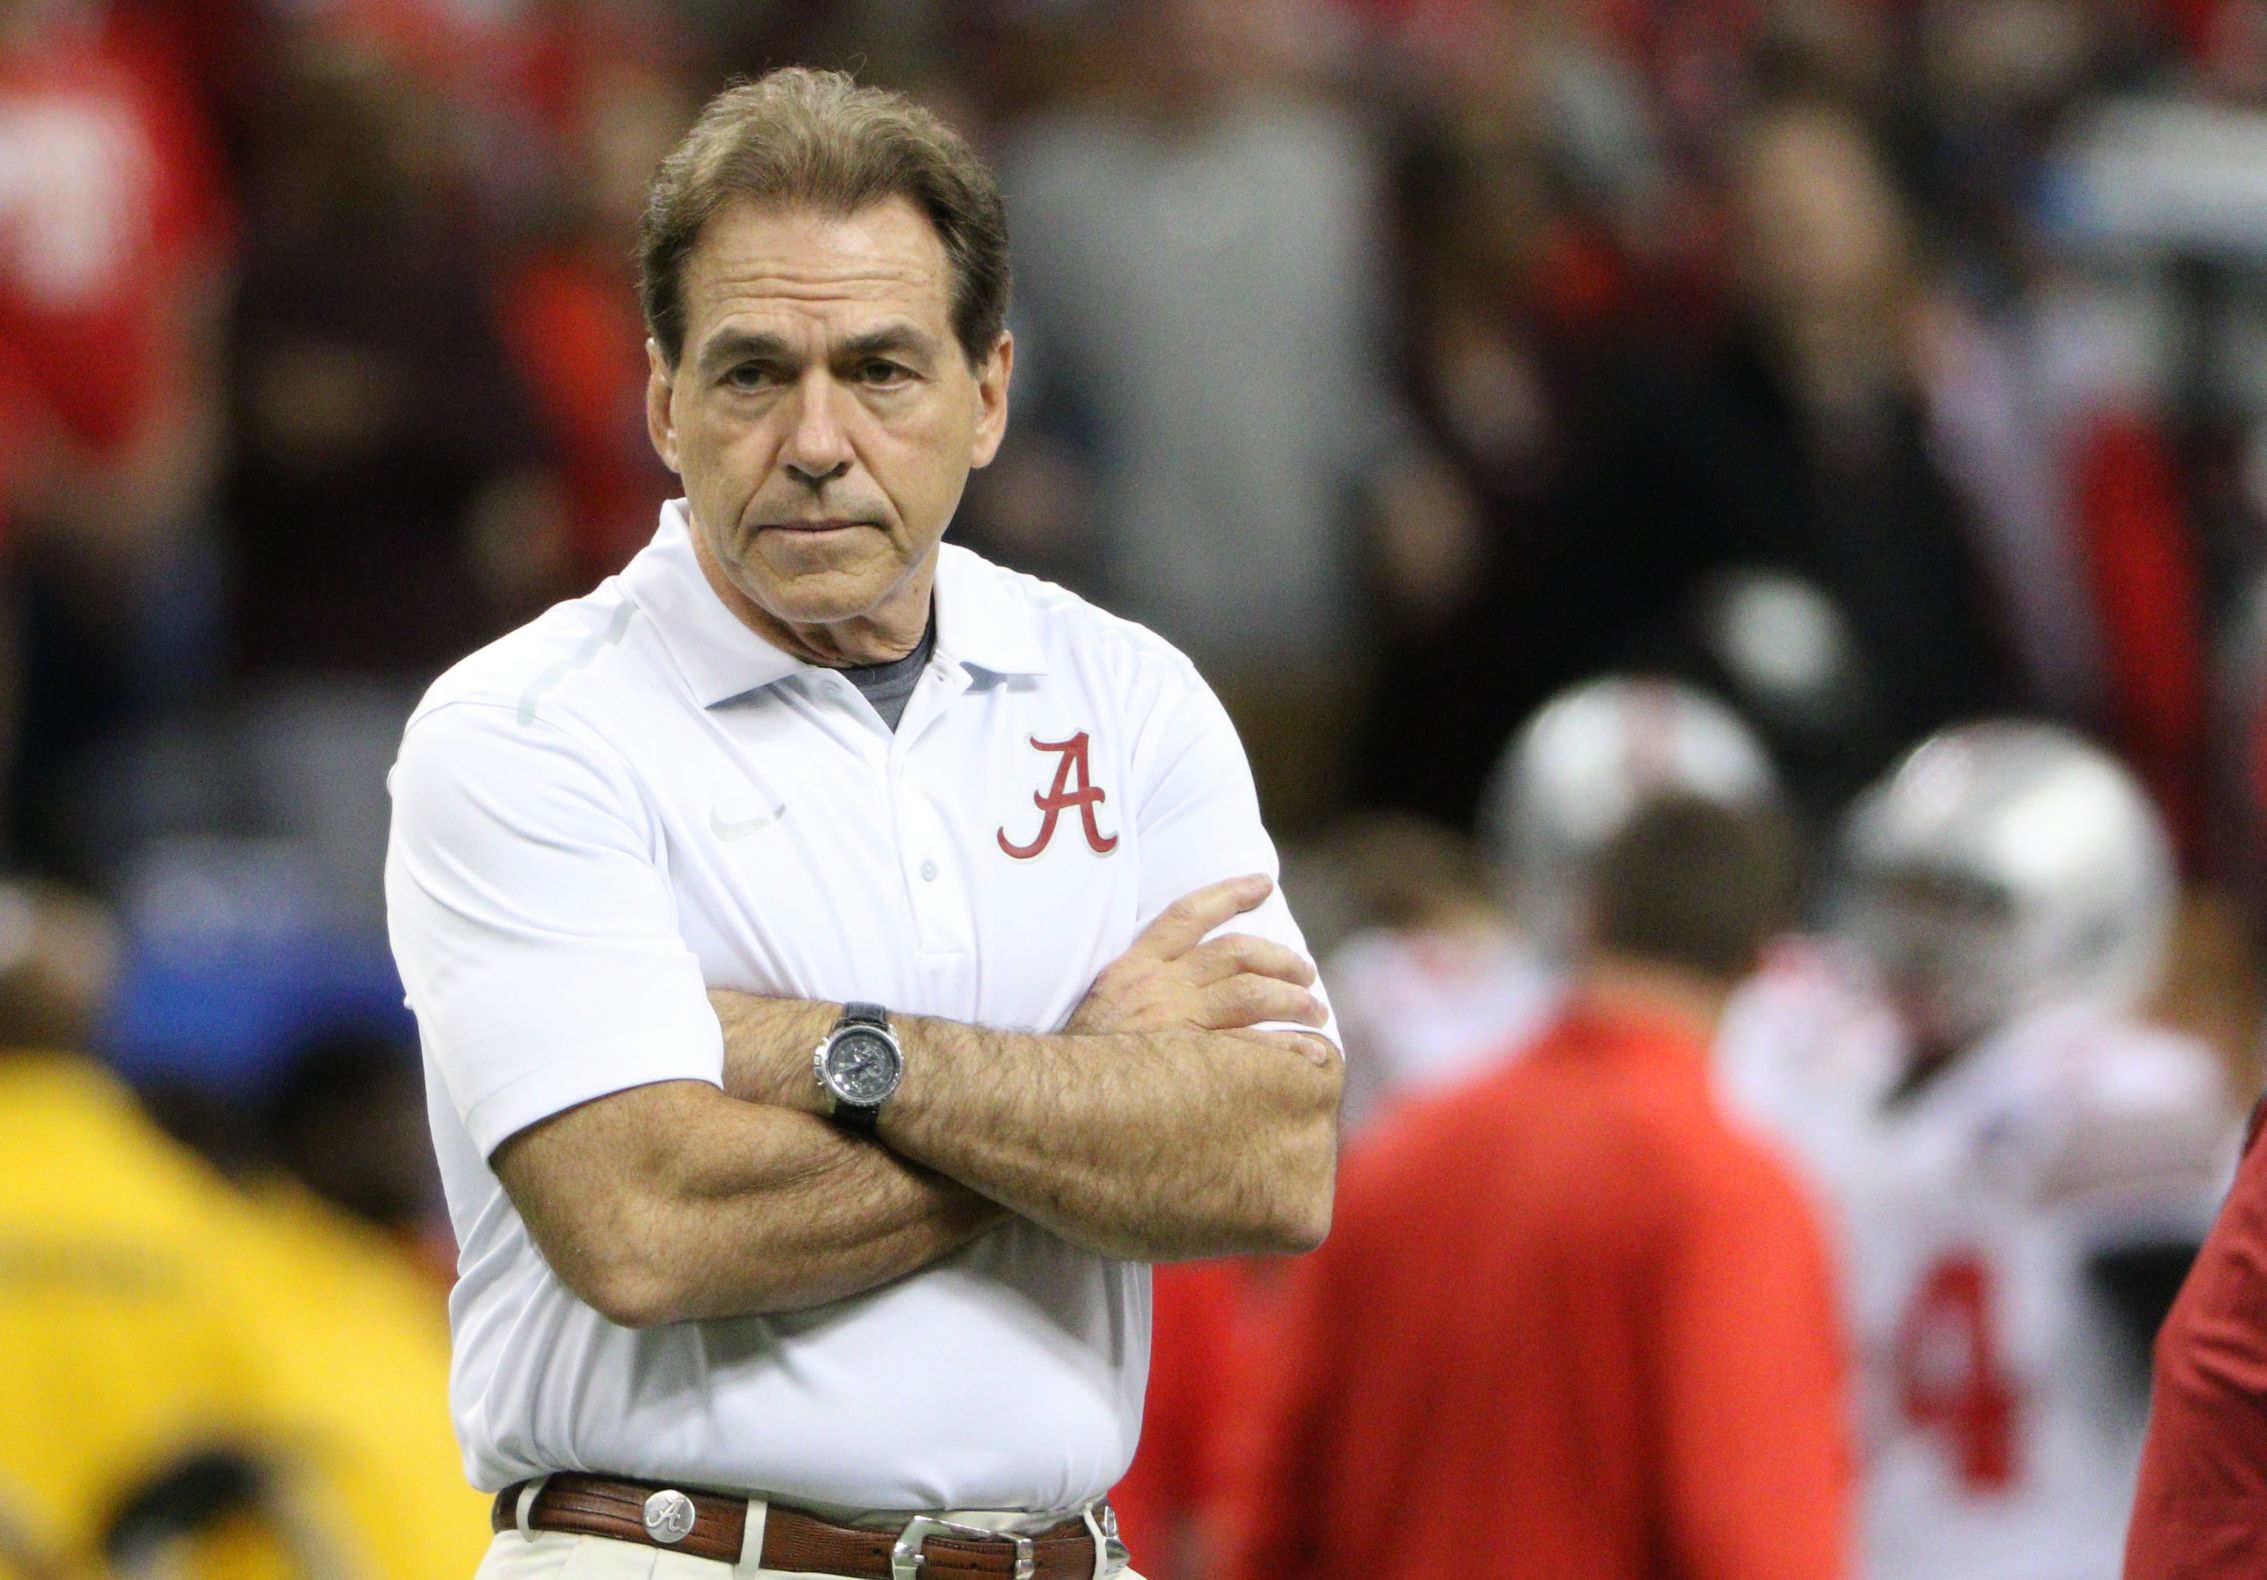 Disappointed Saban Blank Meme Template